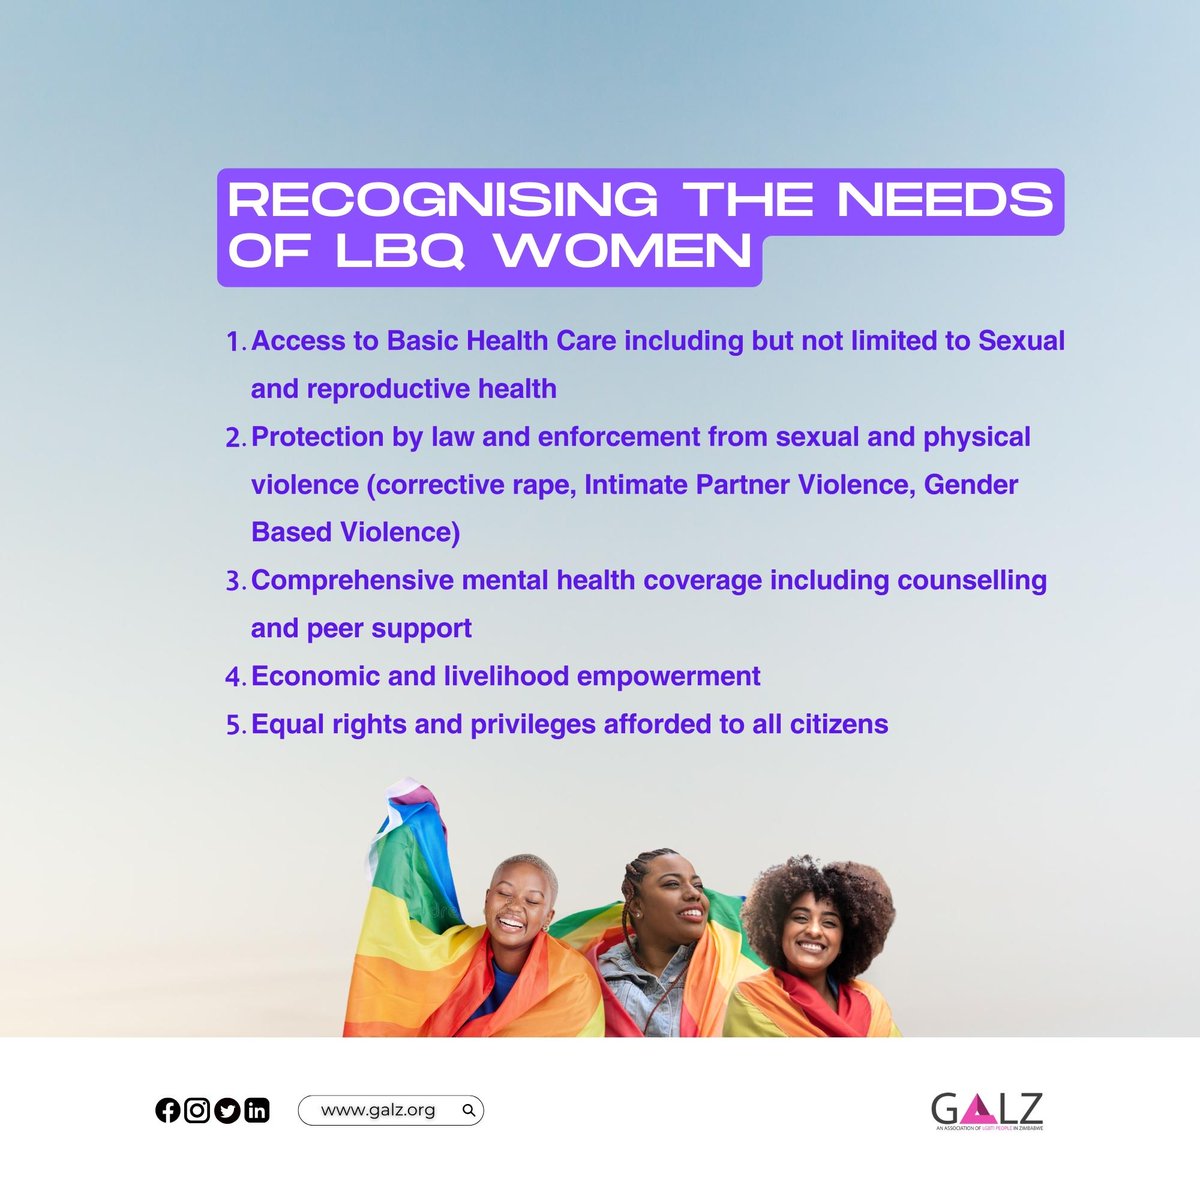 Recognising the unique needs of LBQ women worldwide.
#lesbianvisibilityweek
#shematters 
#accessibility